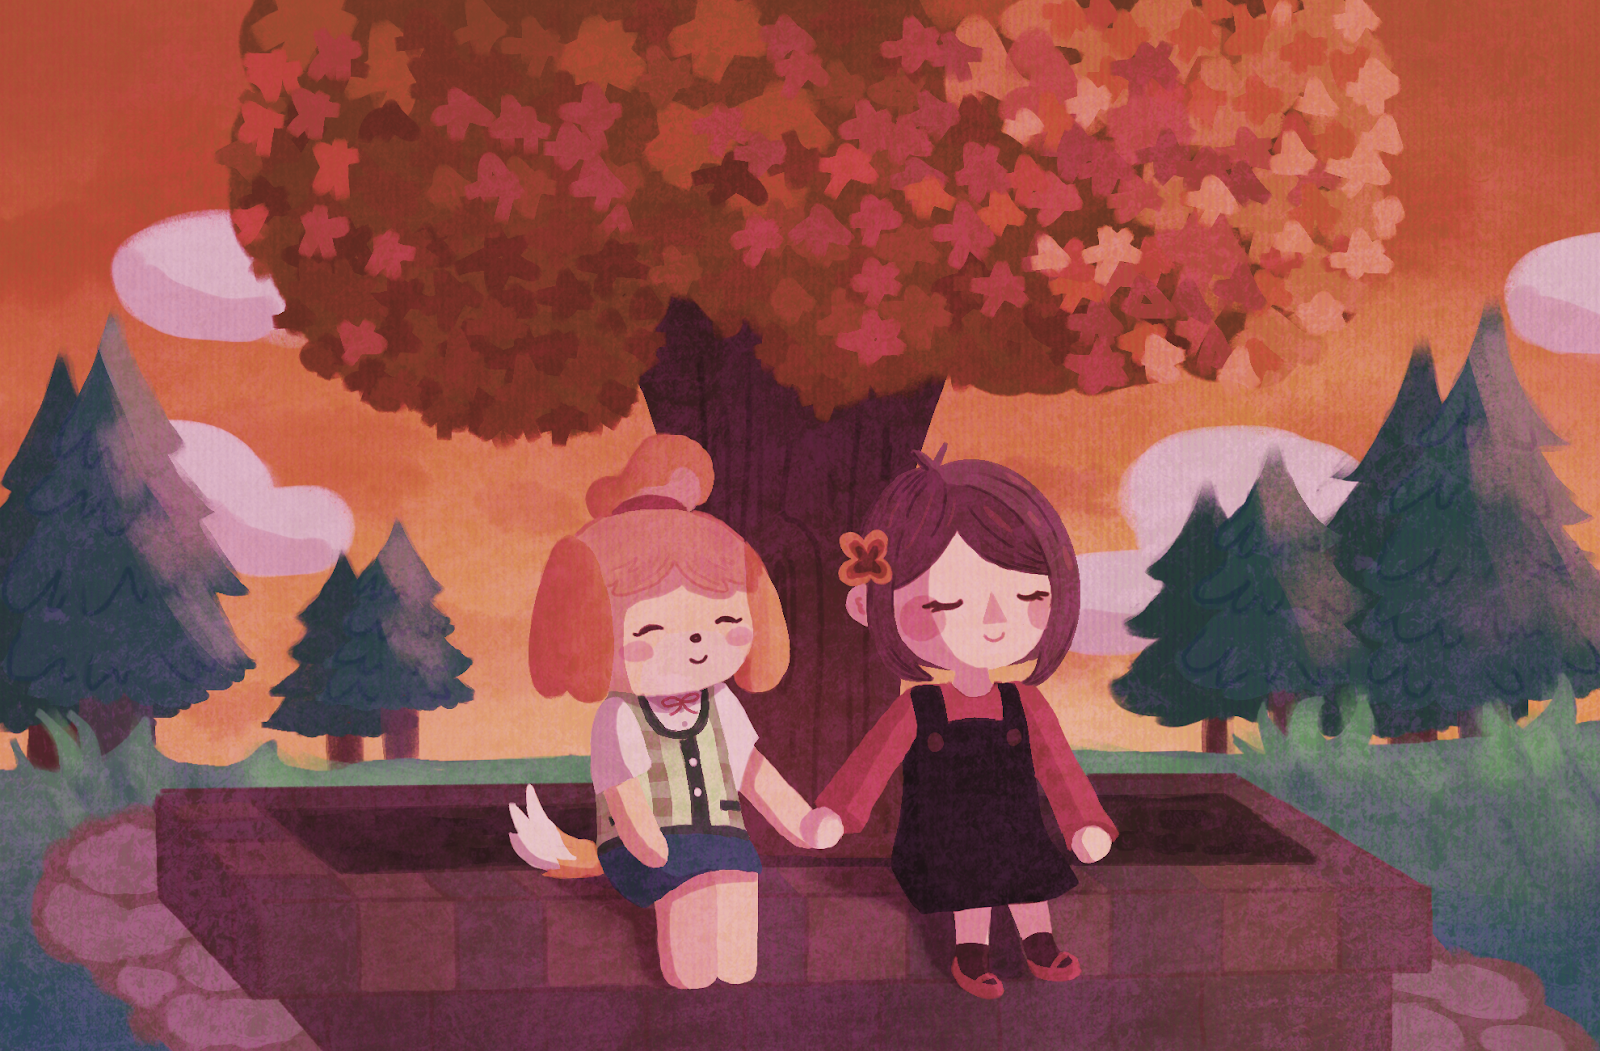 Animal Crossing teaches us about loneliness and community